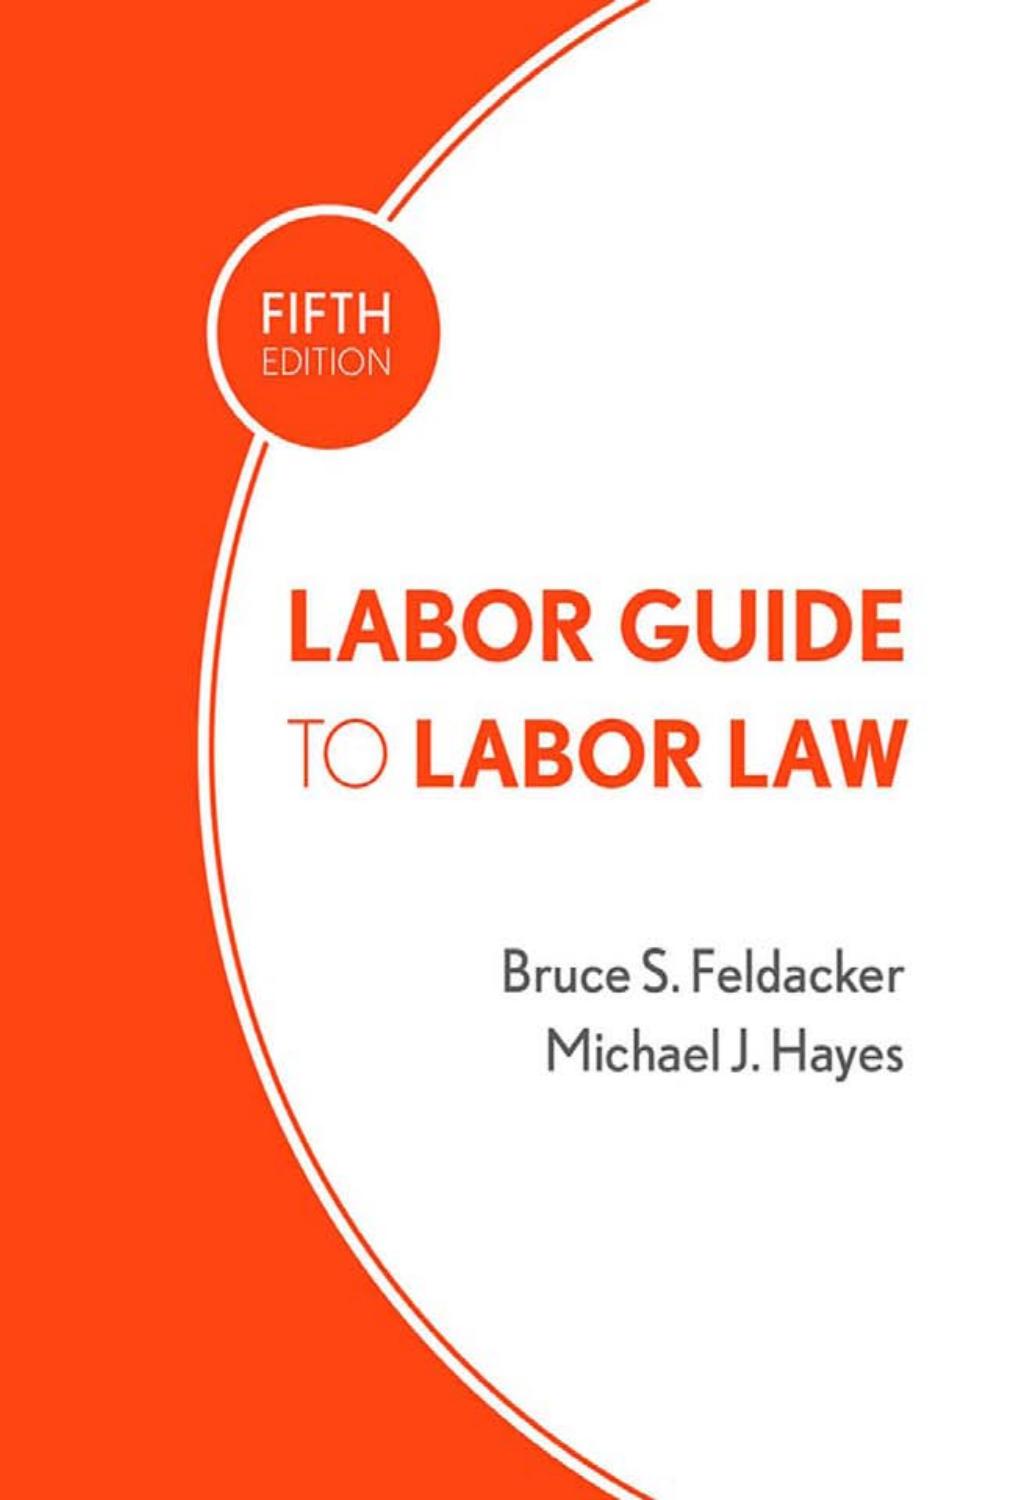 Labor Guide to Labor Law by by Bruce S. Feldacker & Michael J. Hayes